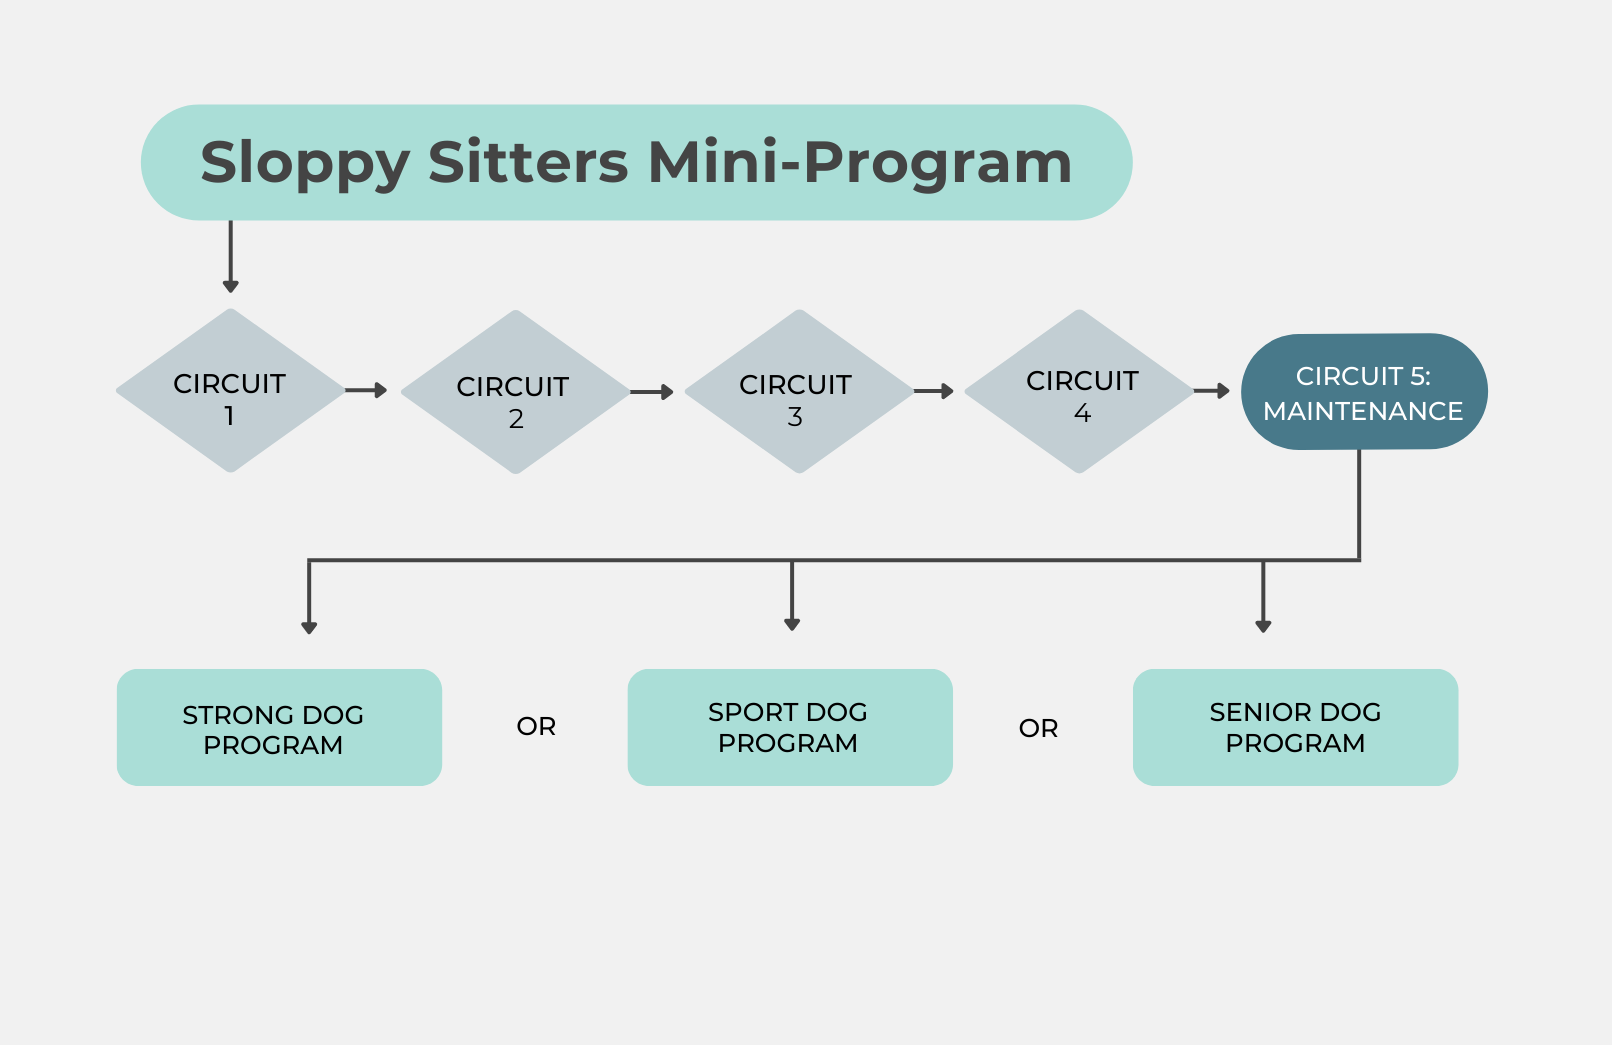 Map showing the circuit progression through the Sloppy Sitters Mini-Program